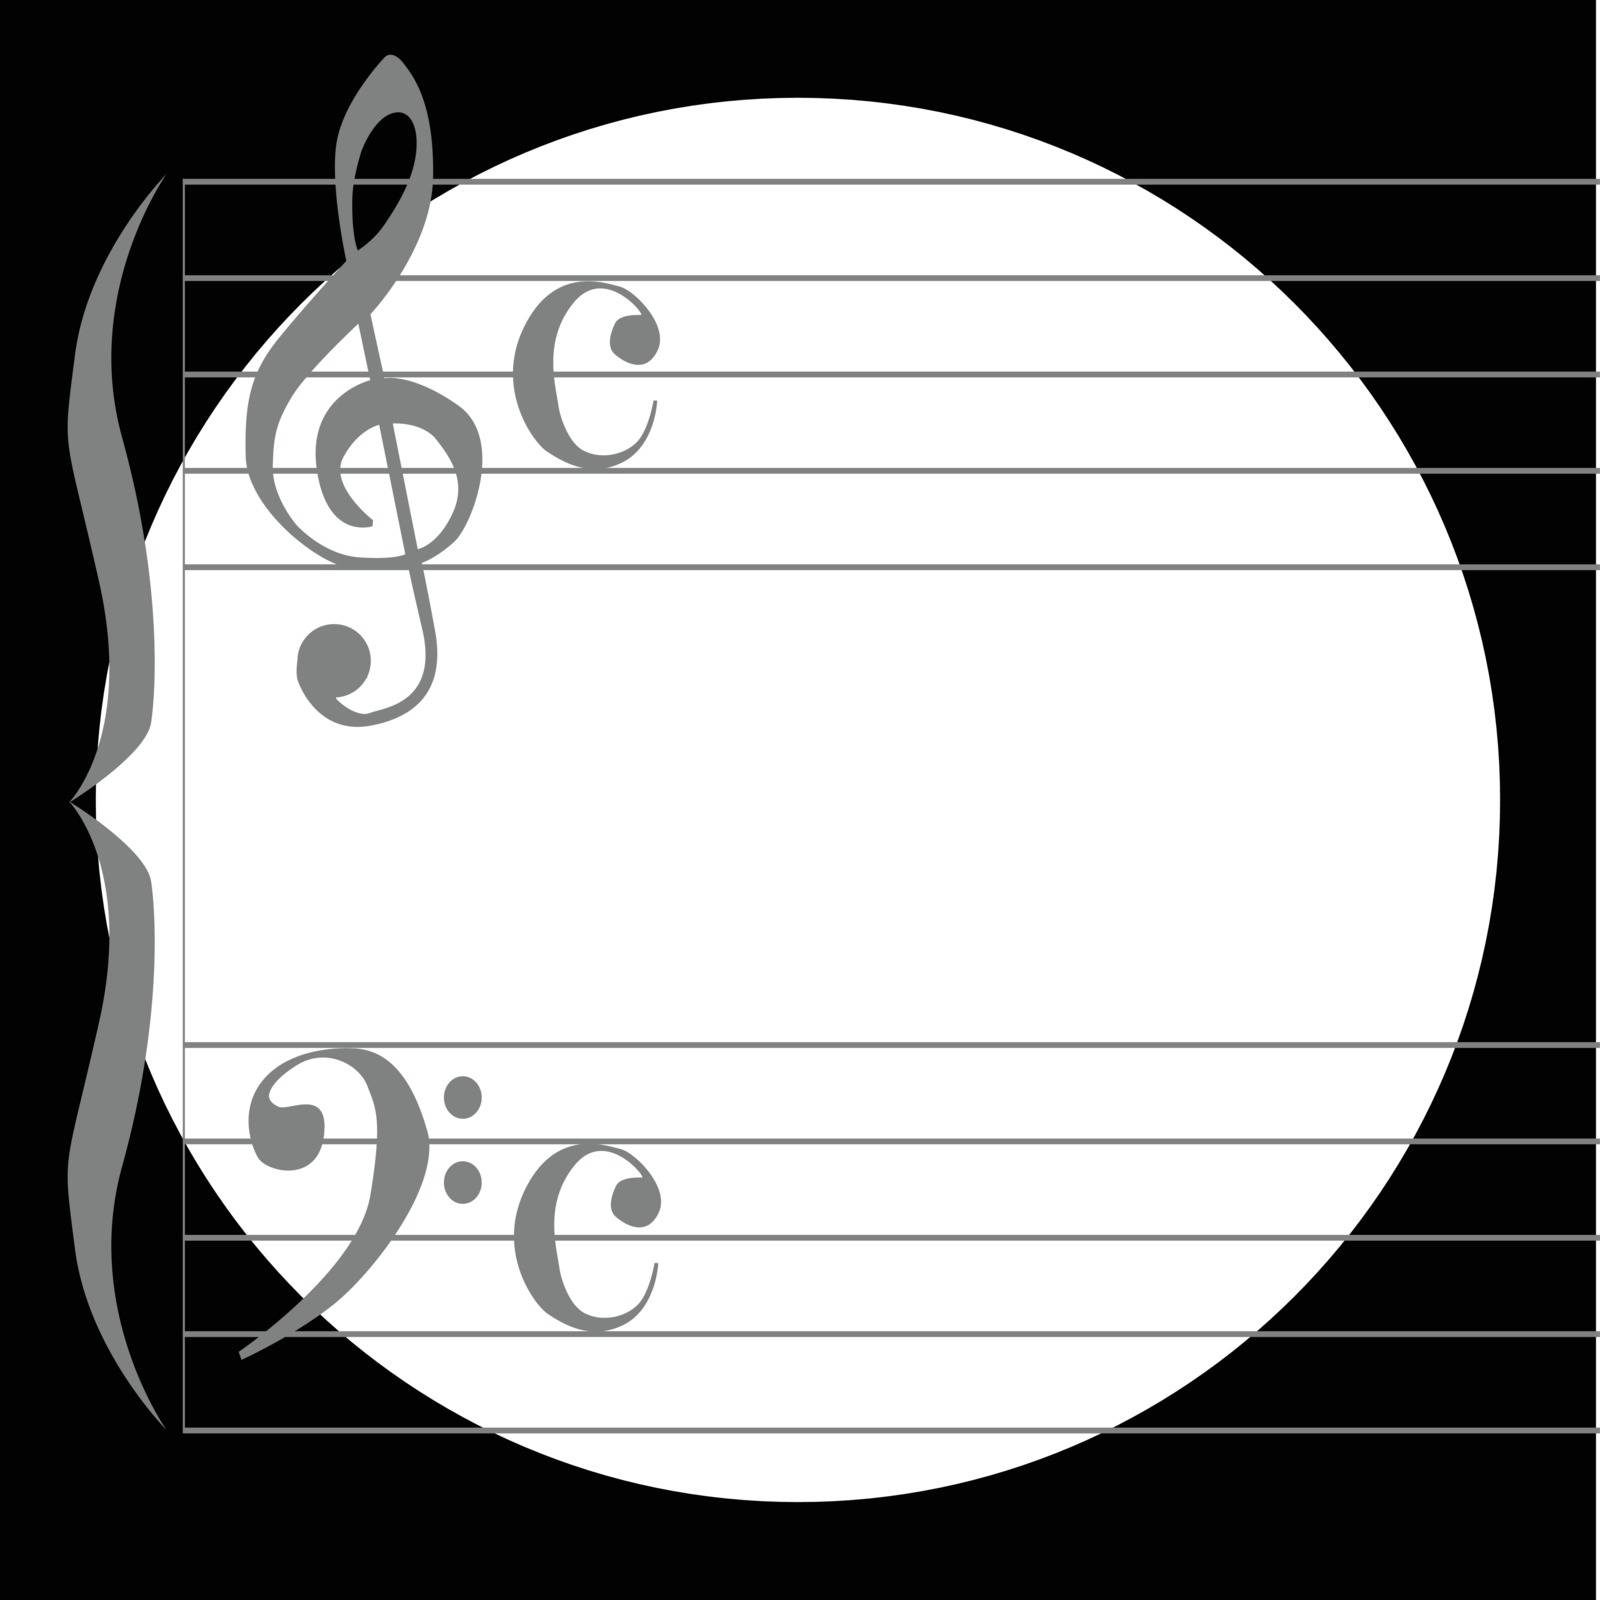 A black and white circle with the a musical stave foreground